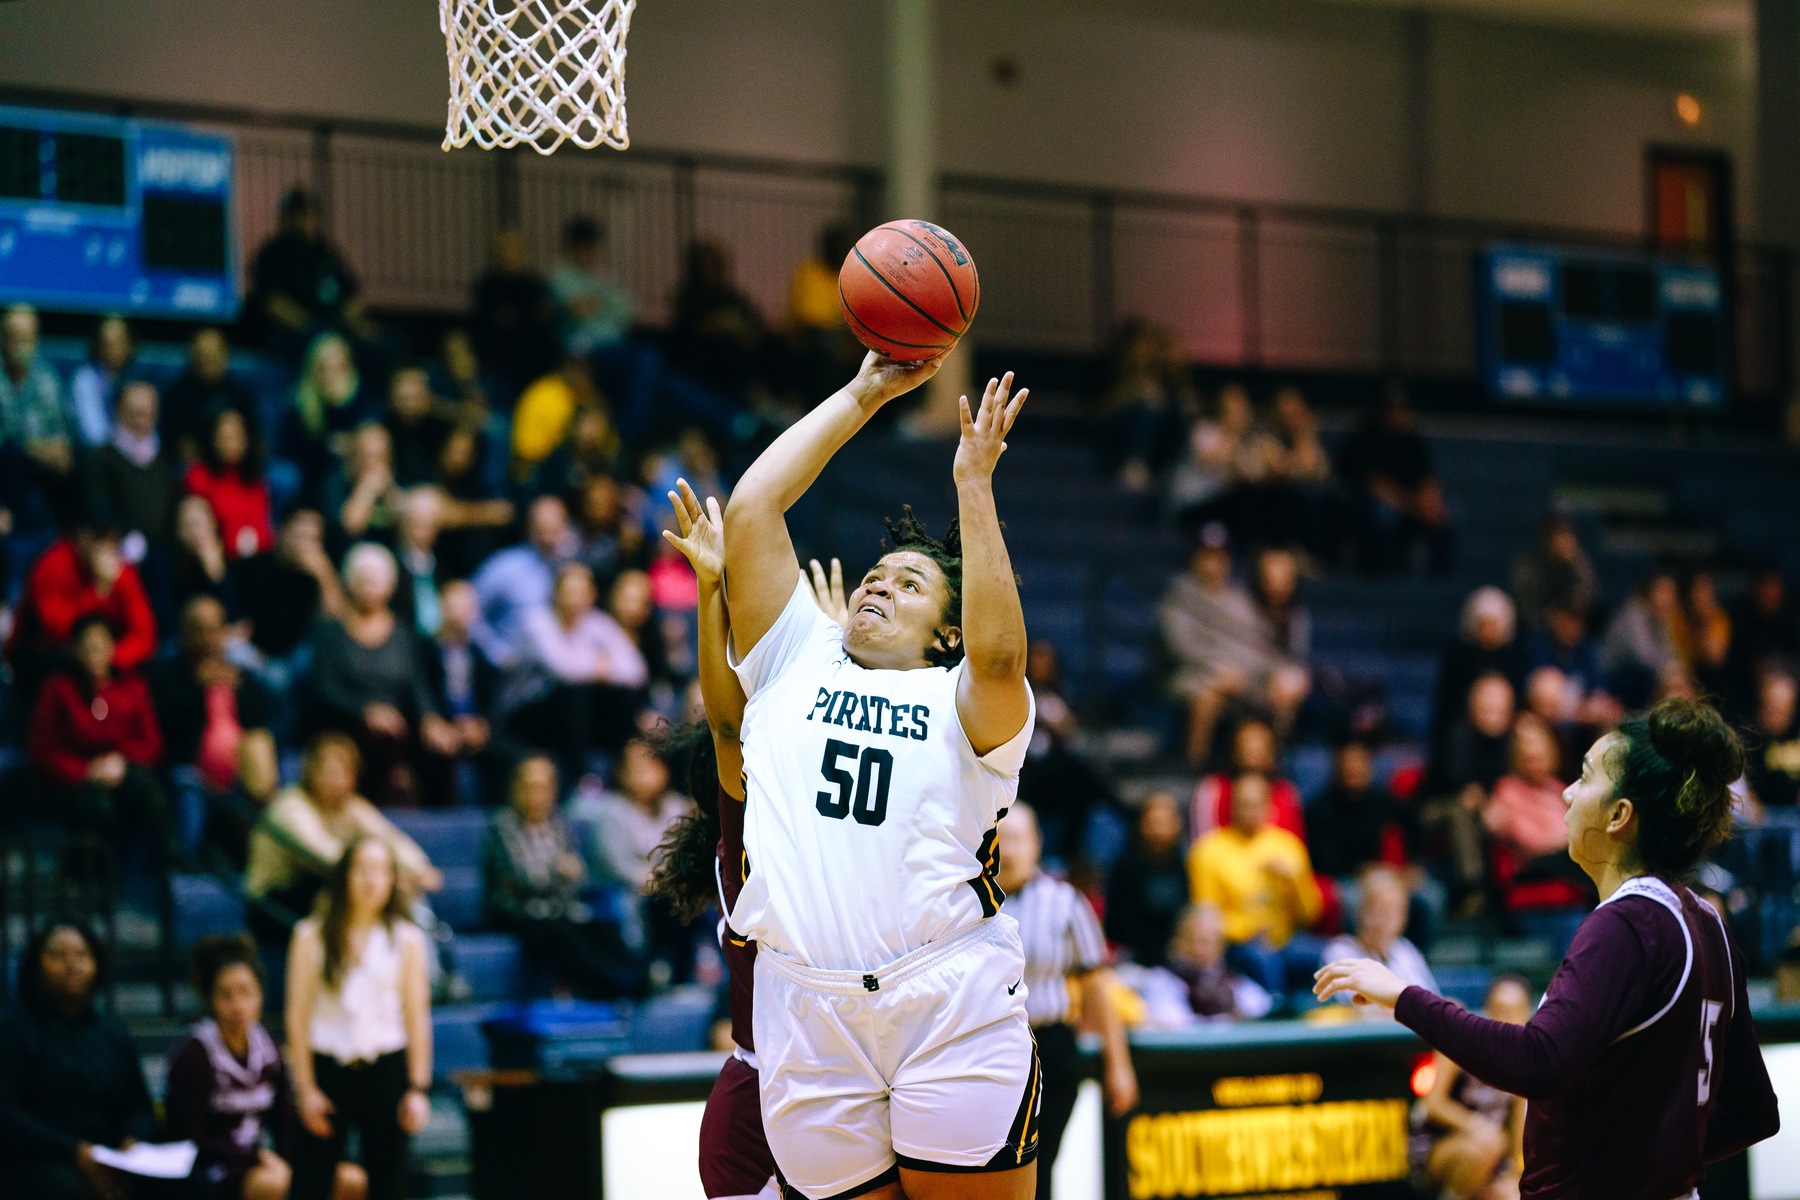 Women's Basketball Loses On The Road To Centenary